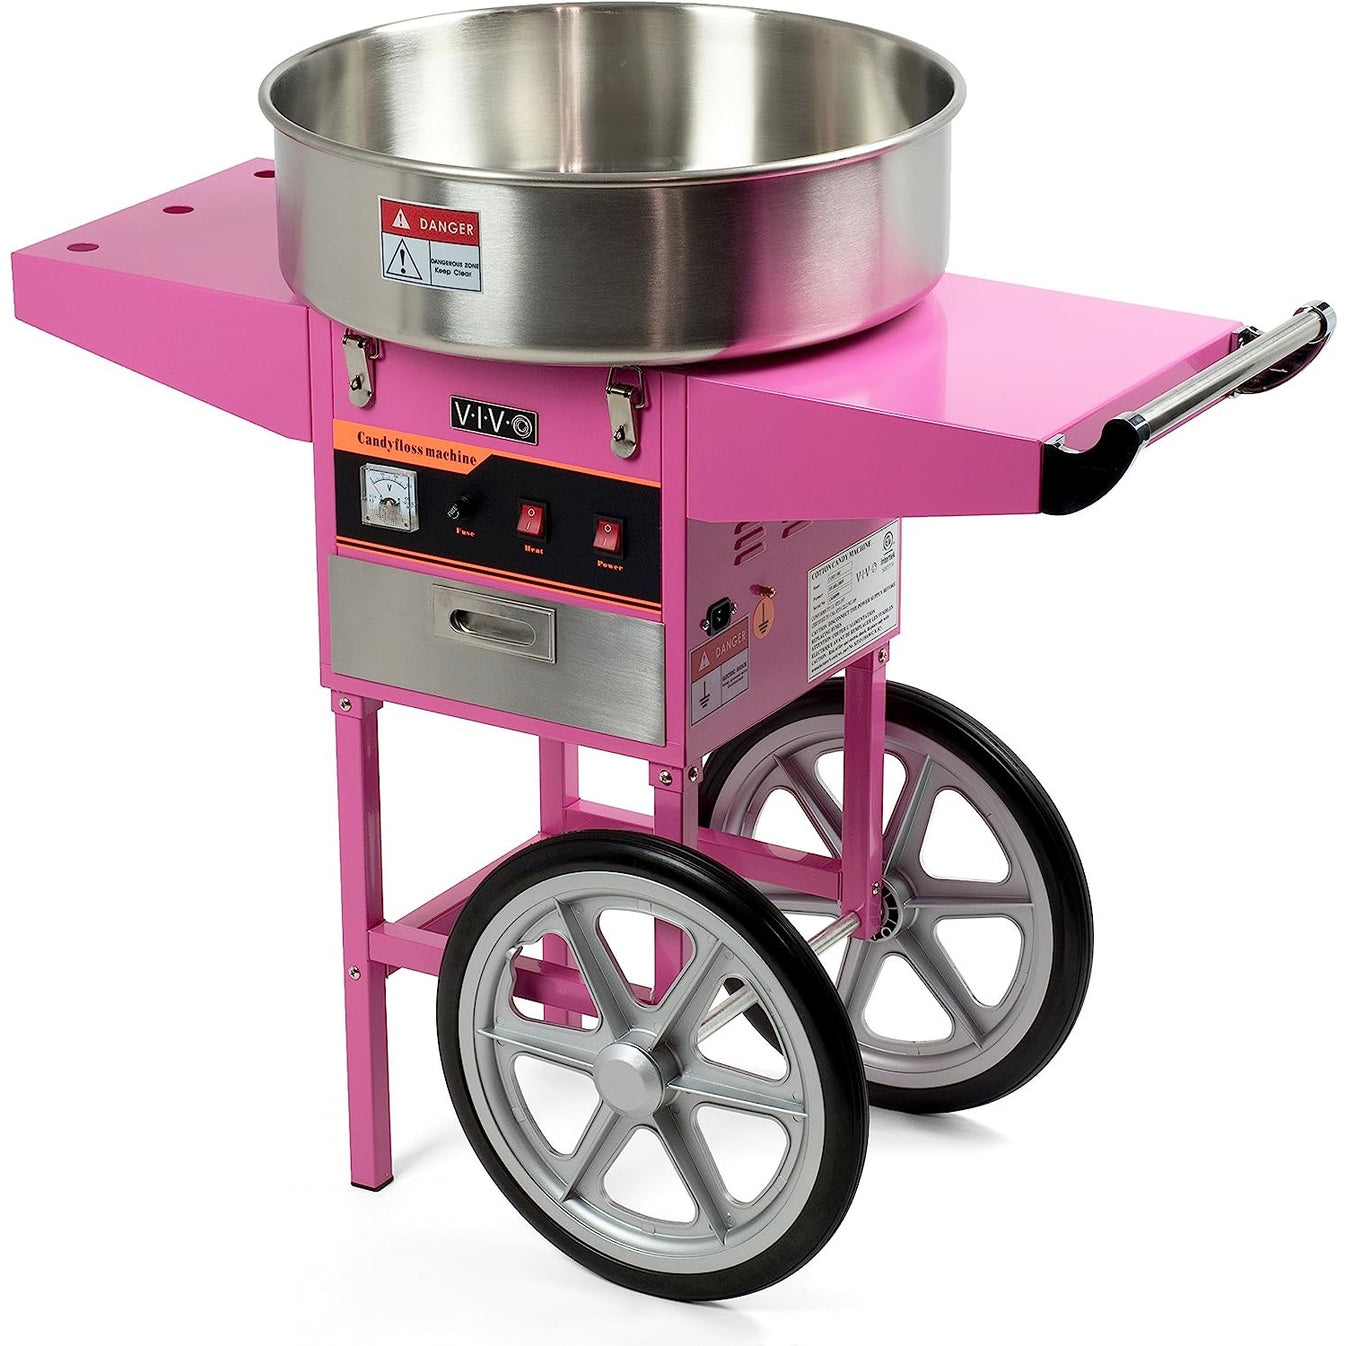 Create A Sweet Party Atmosphere With This Colorful Cotton Candy Machin 